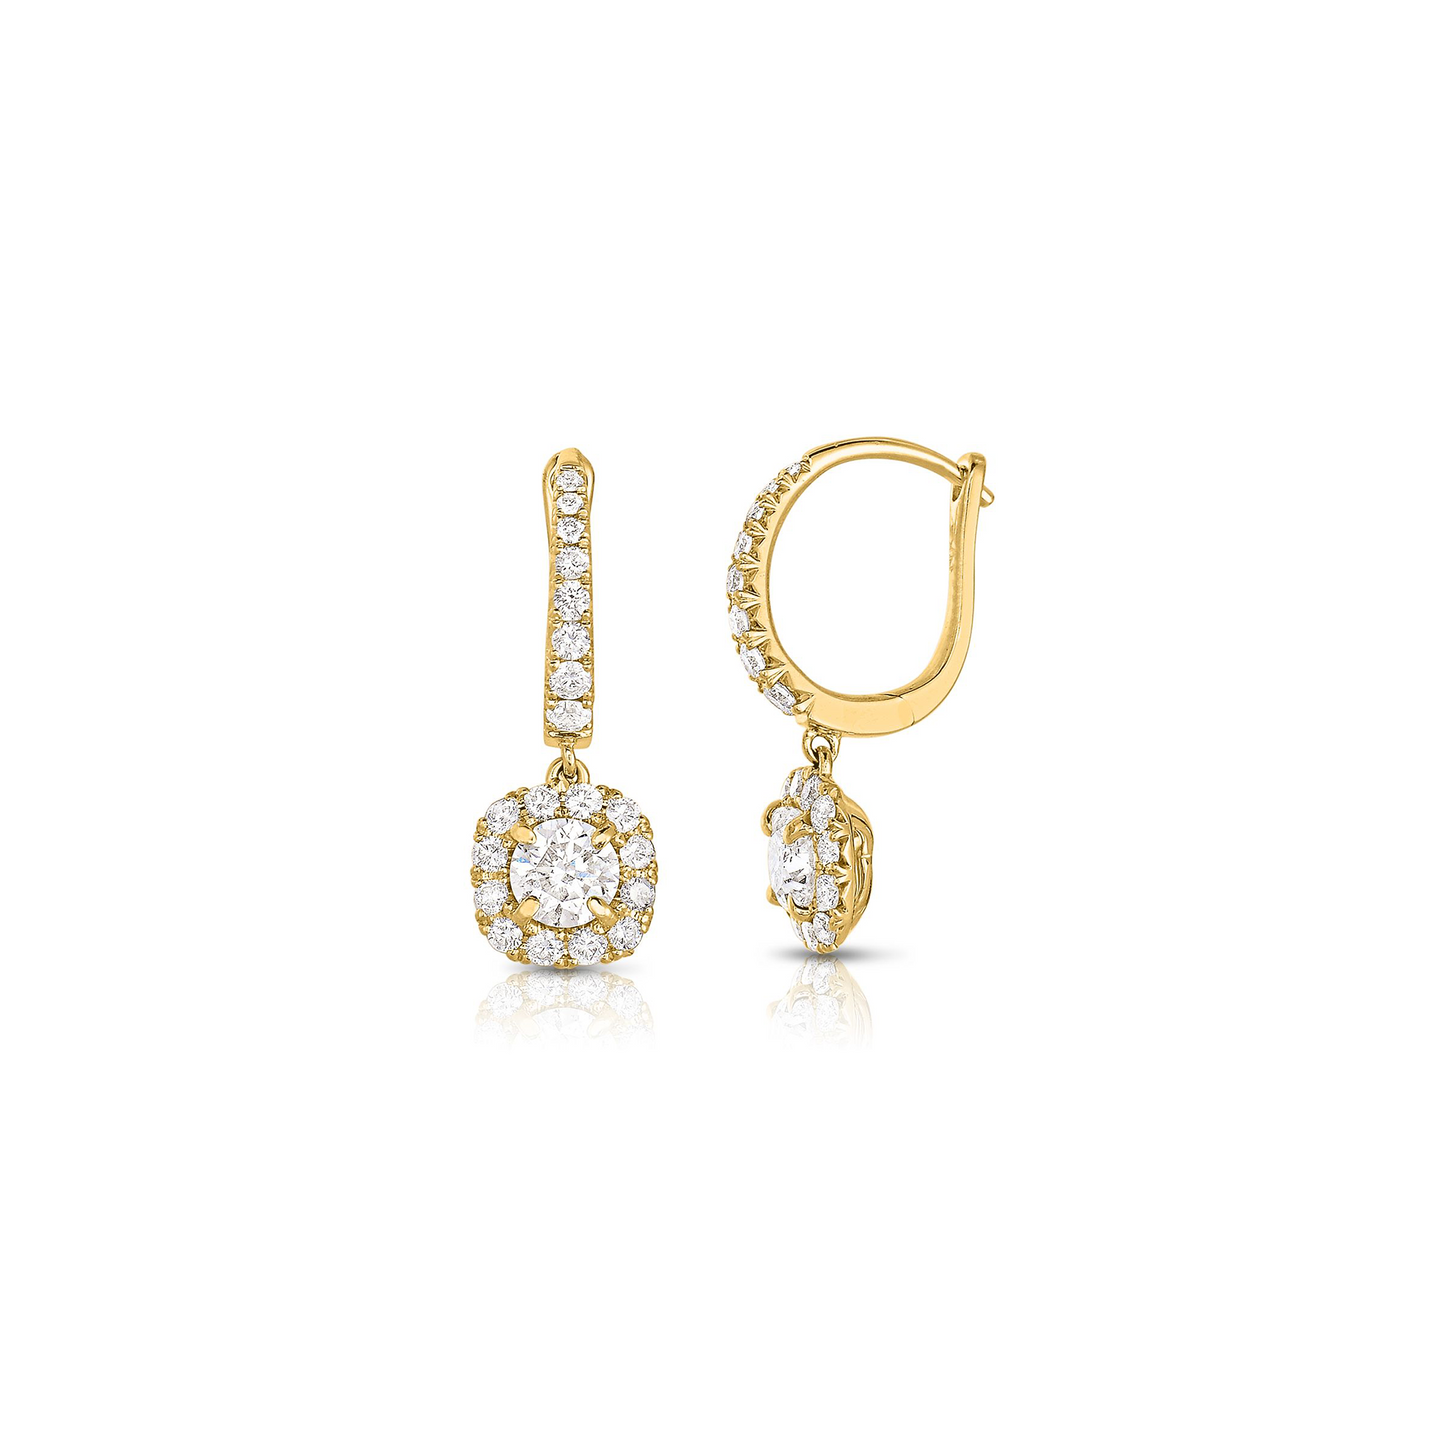 Sabel Collection 14K Yellow Gold Round Diamond Halo Earrings